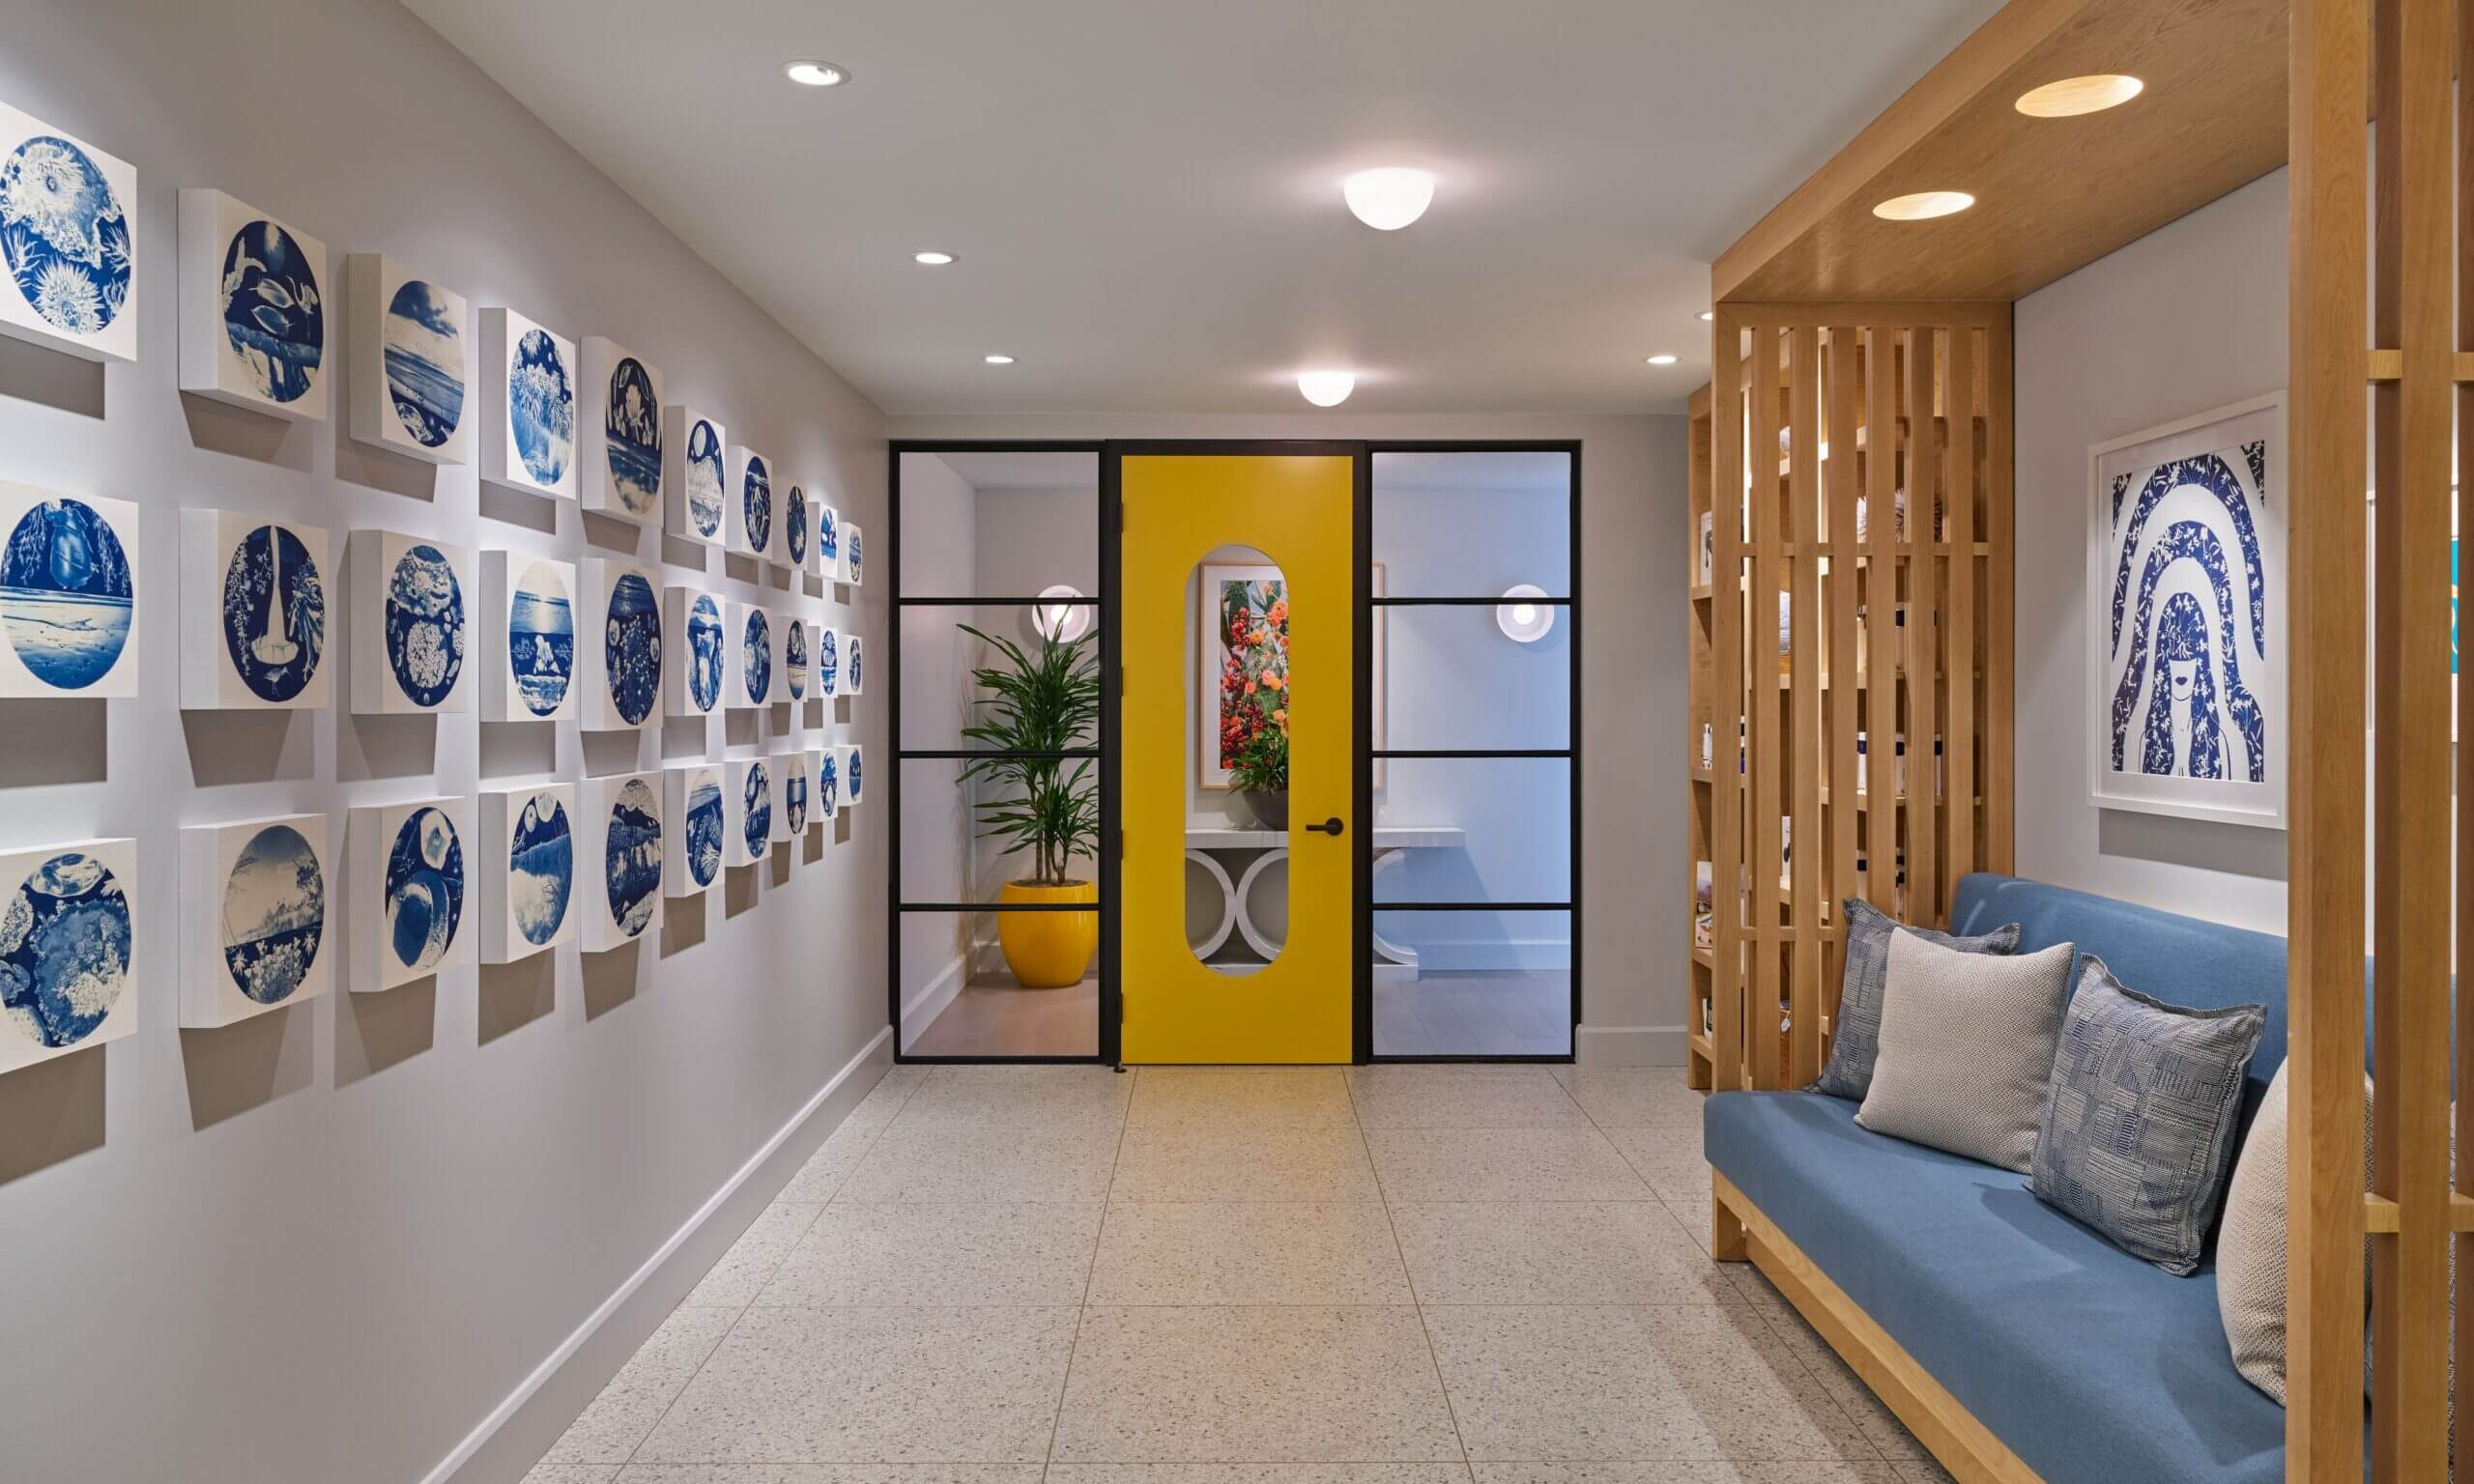 The beautiful entrance, with touches of blue and yellow details